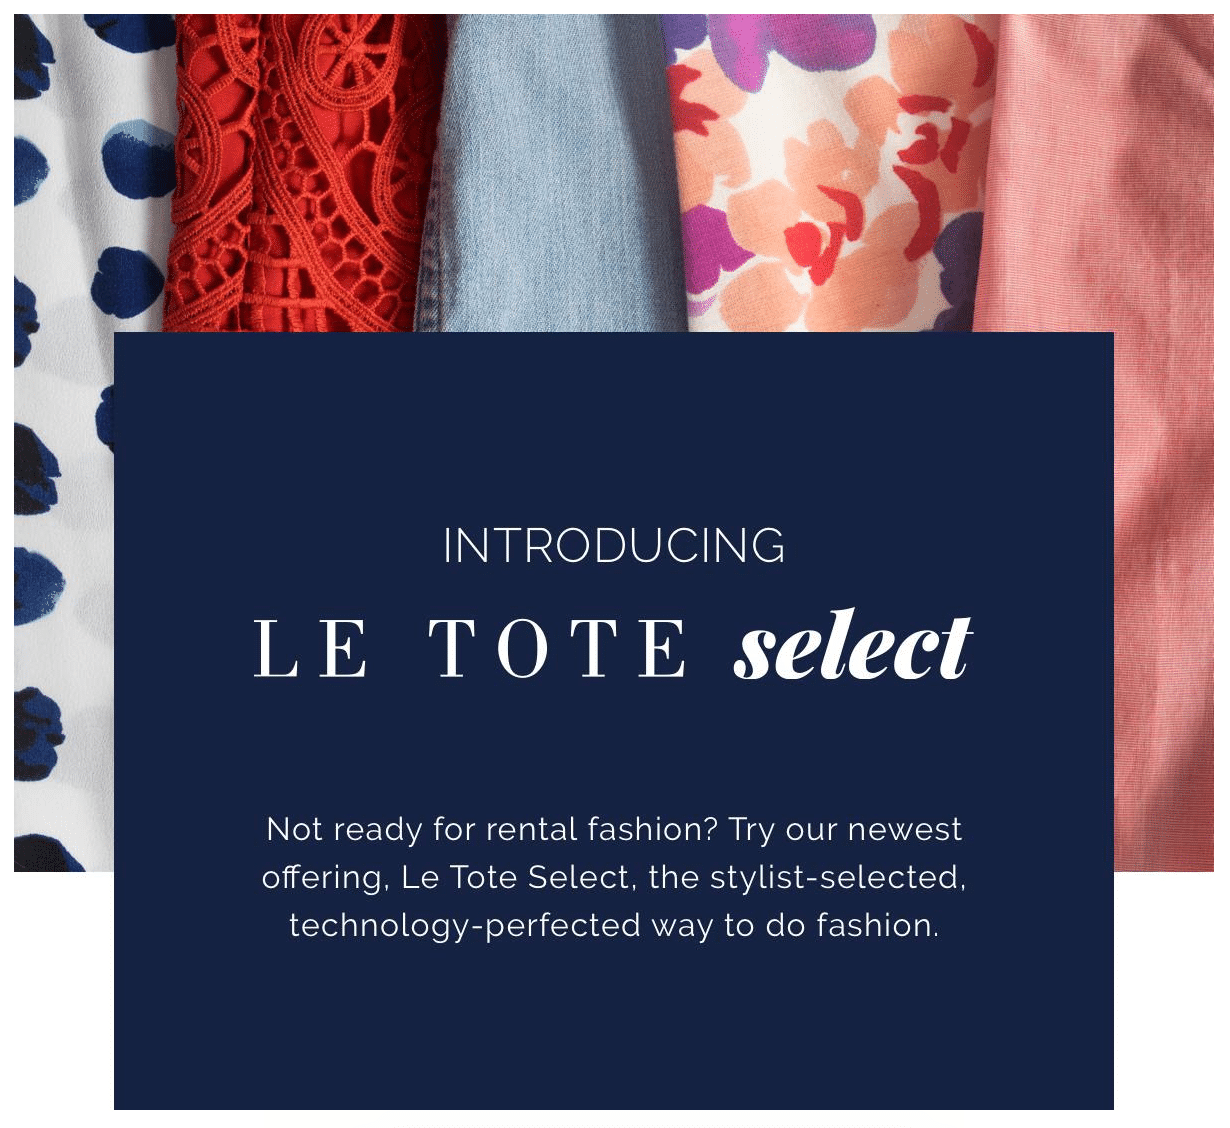 New Le Tote Subscription Available Now – Le Tote Select!